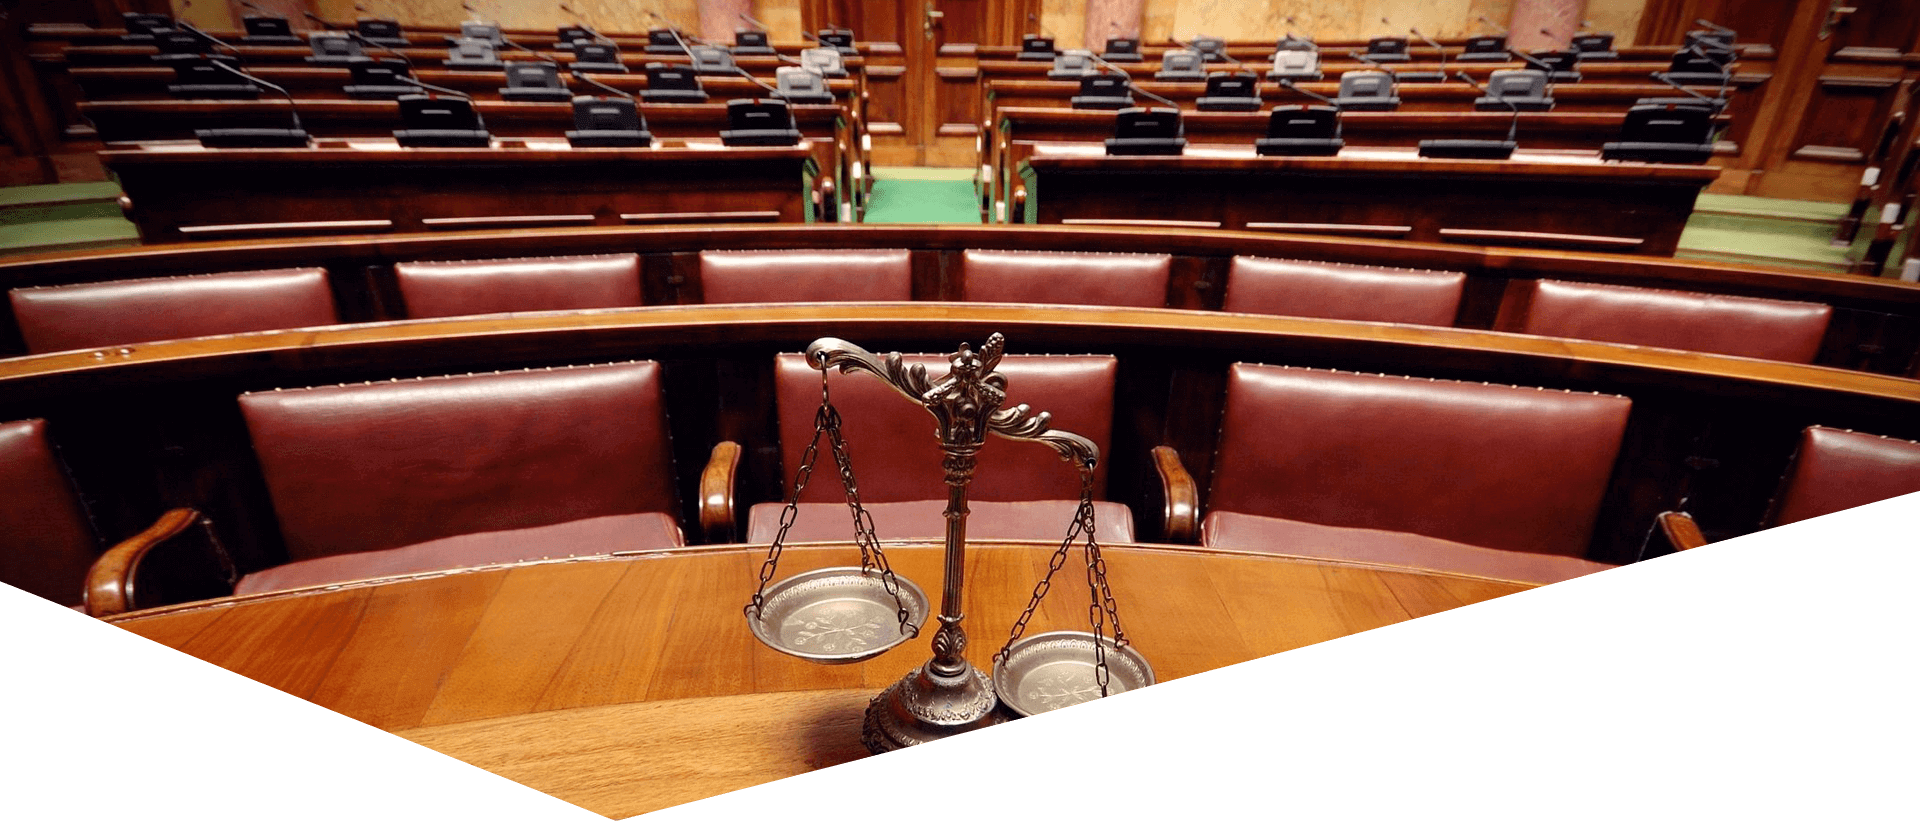 Symbol of Law and Justice in the Empty Courtroom, Law and Justice Concept